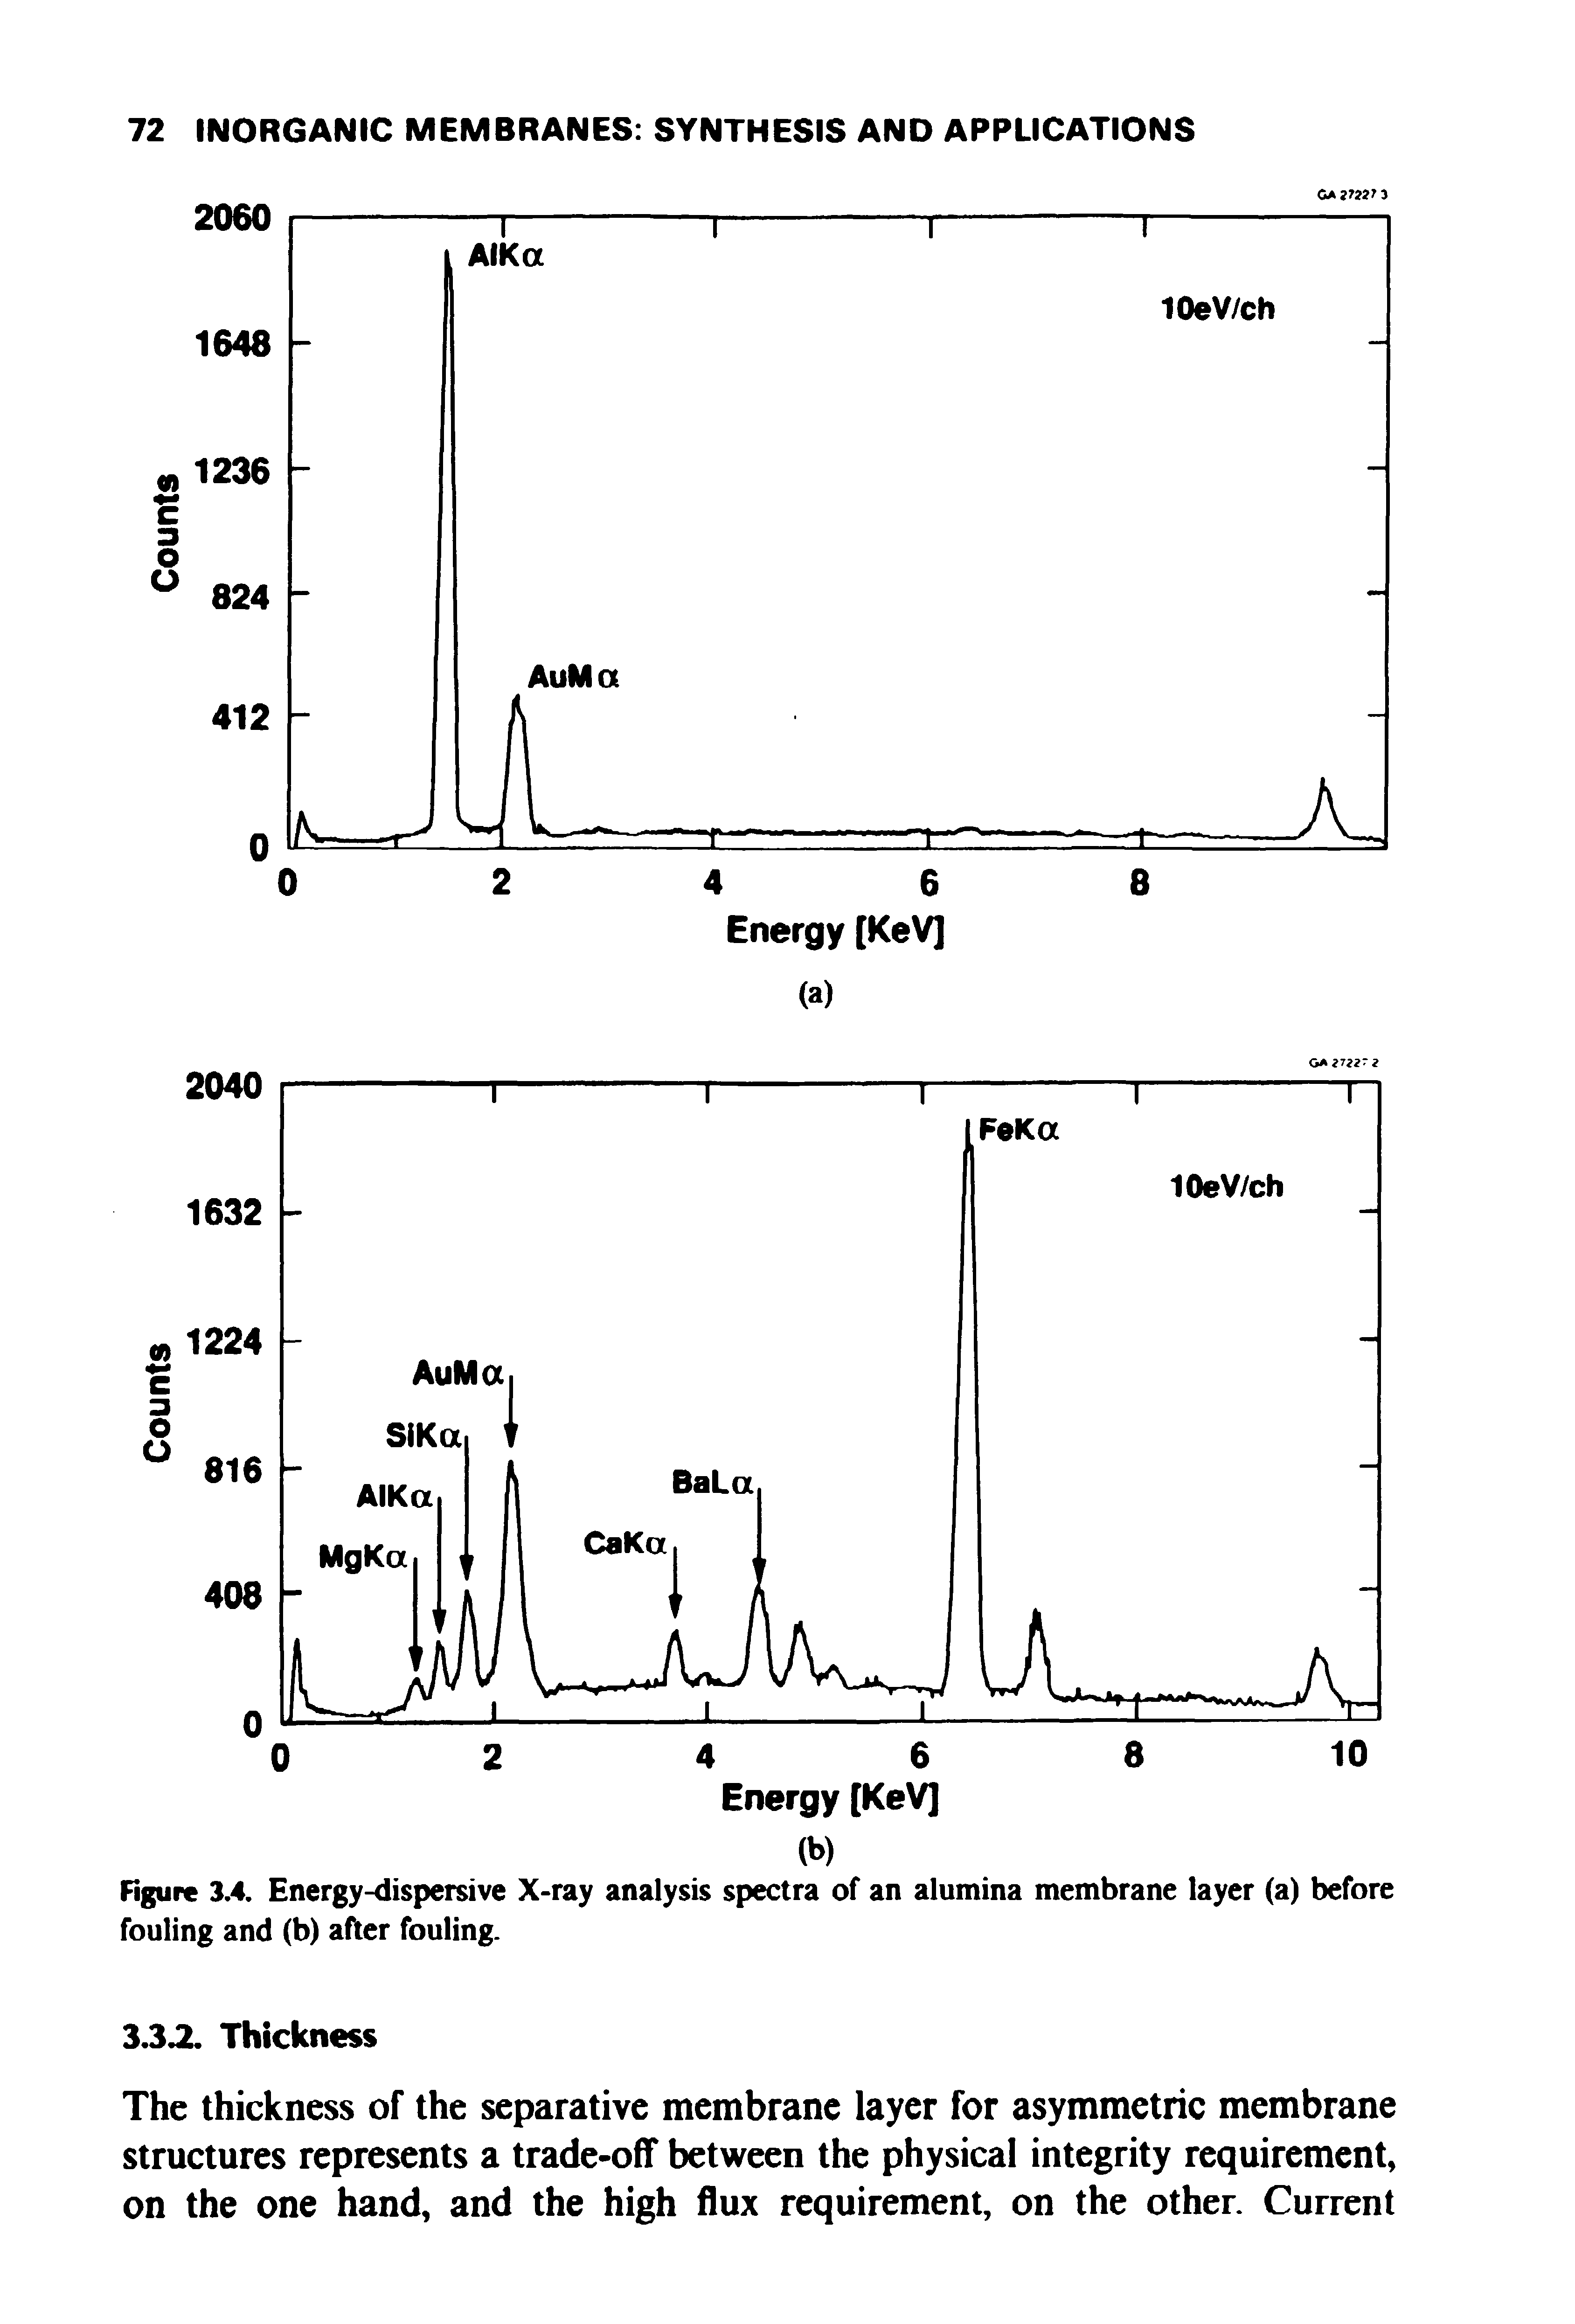 Figure 3.4. Energy-dispersive X-ray analysis spectra of an alumina membrane layer (a) before fouling and (b) after fouling.